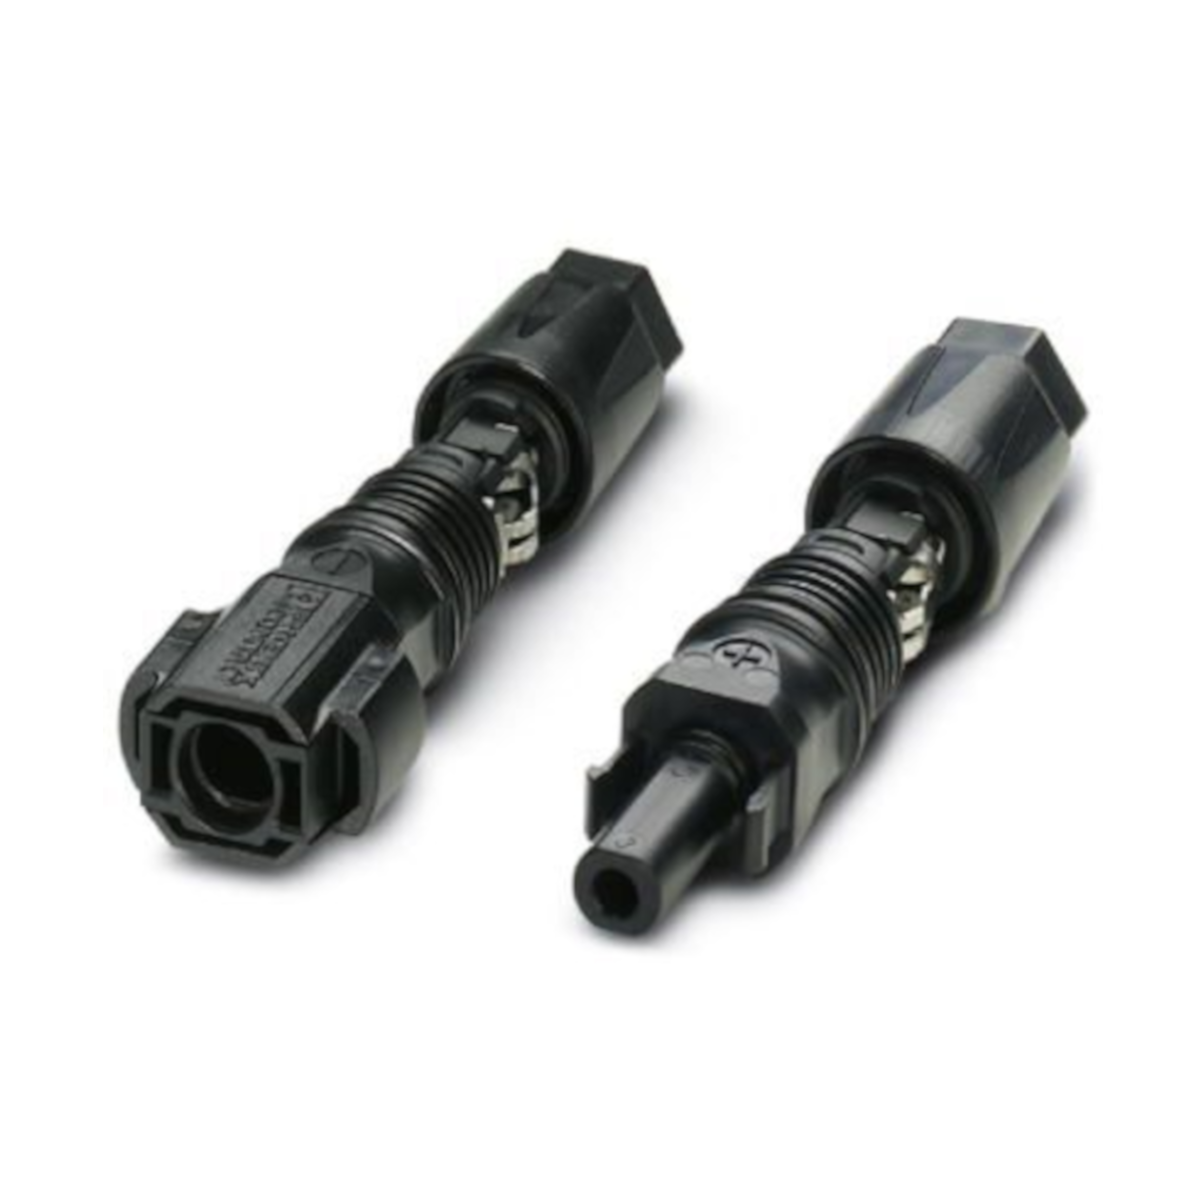 25/6 mm2 Sunclix serial connector set